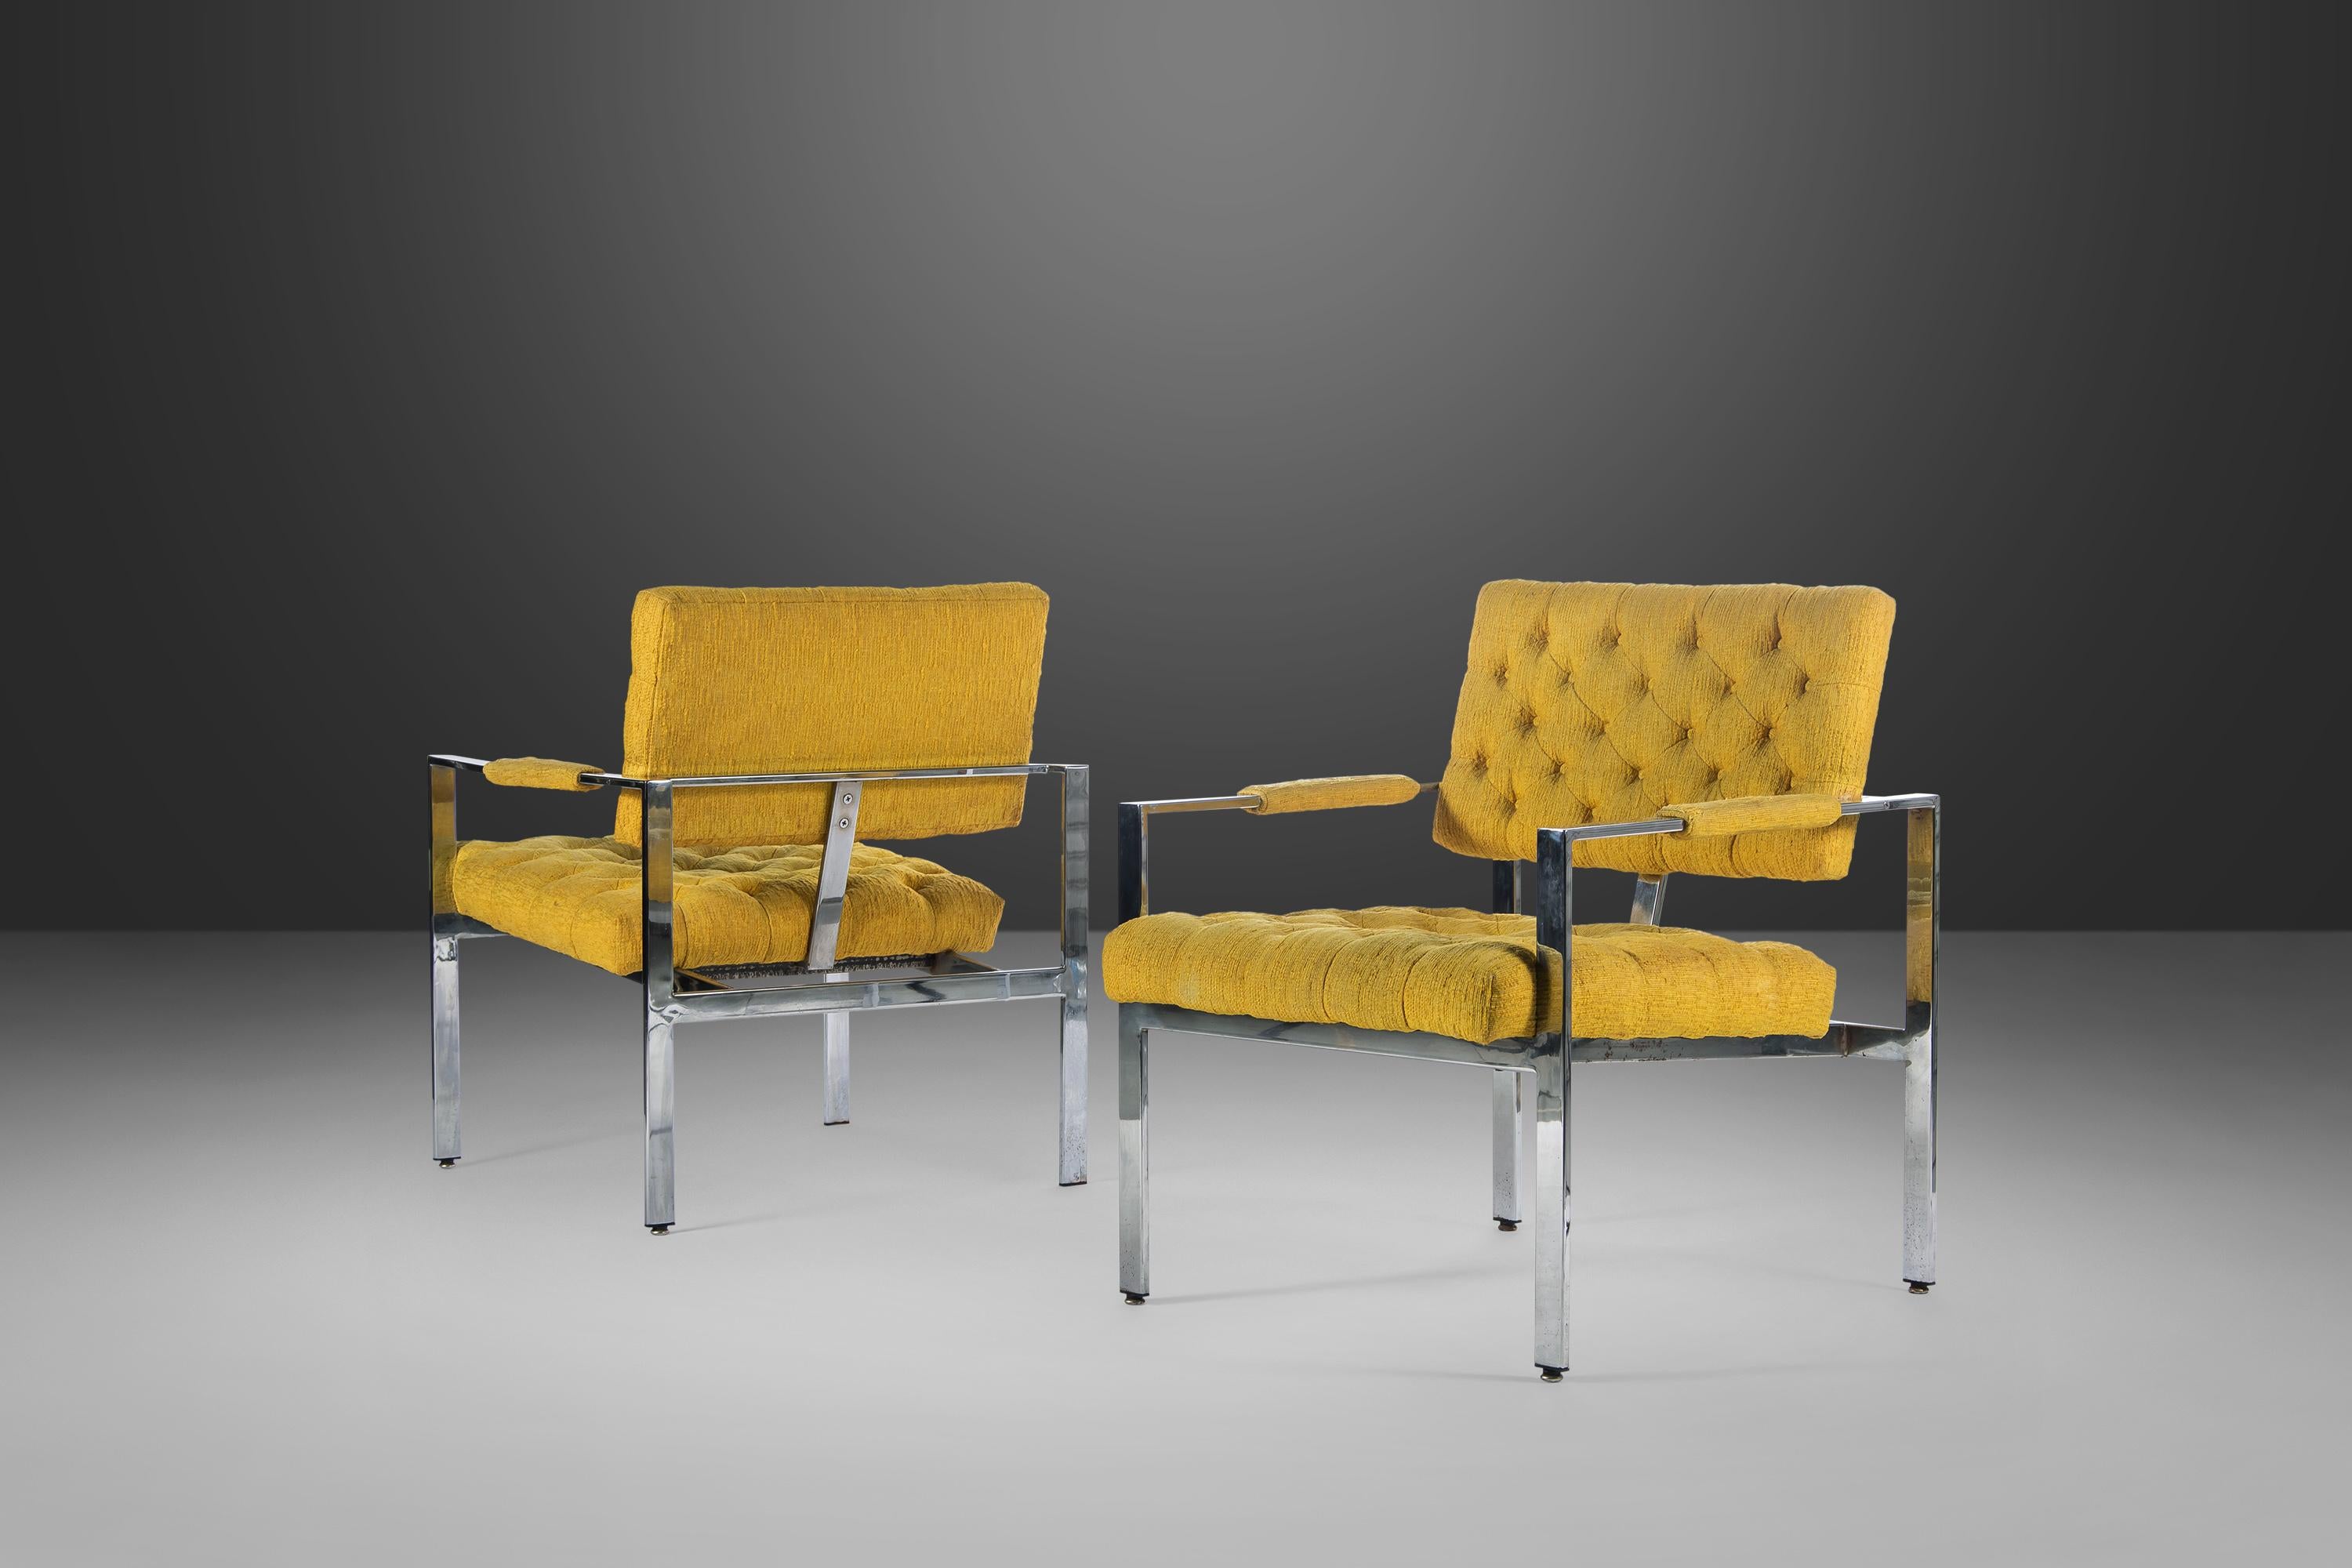 Pair of Chrome Lounge Chairs by Milo Baughman for Thayer Coggin, USA, c. 1970's For Sale 4